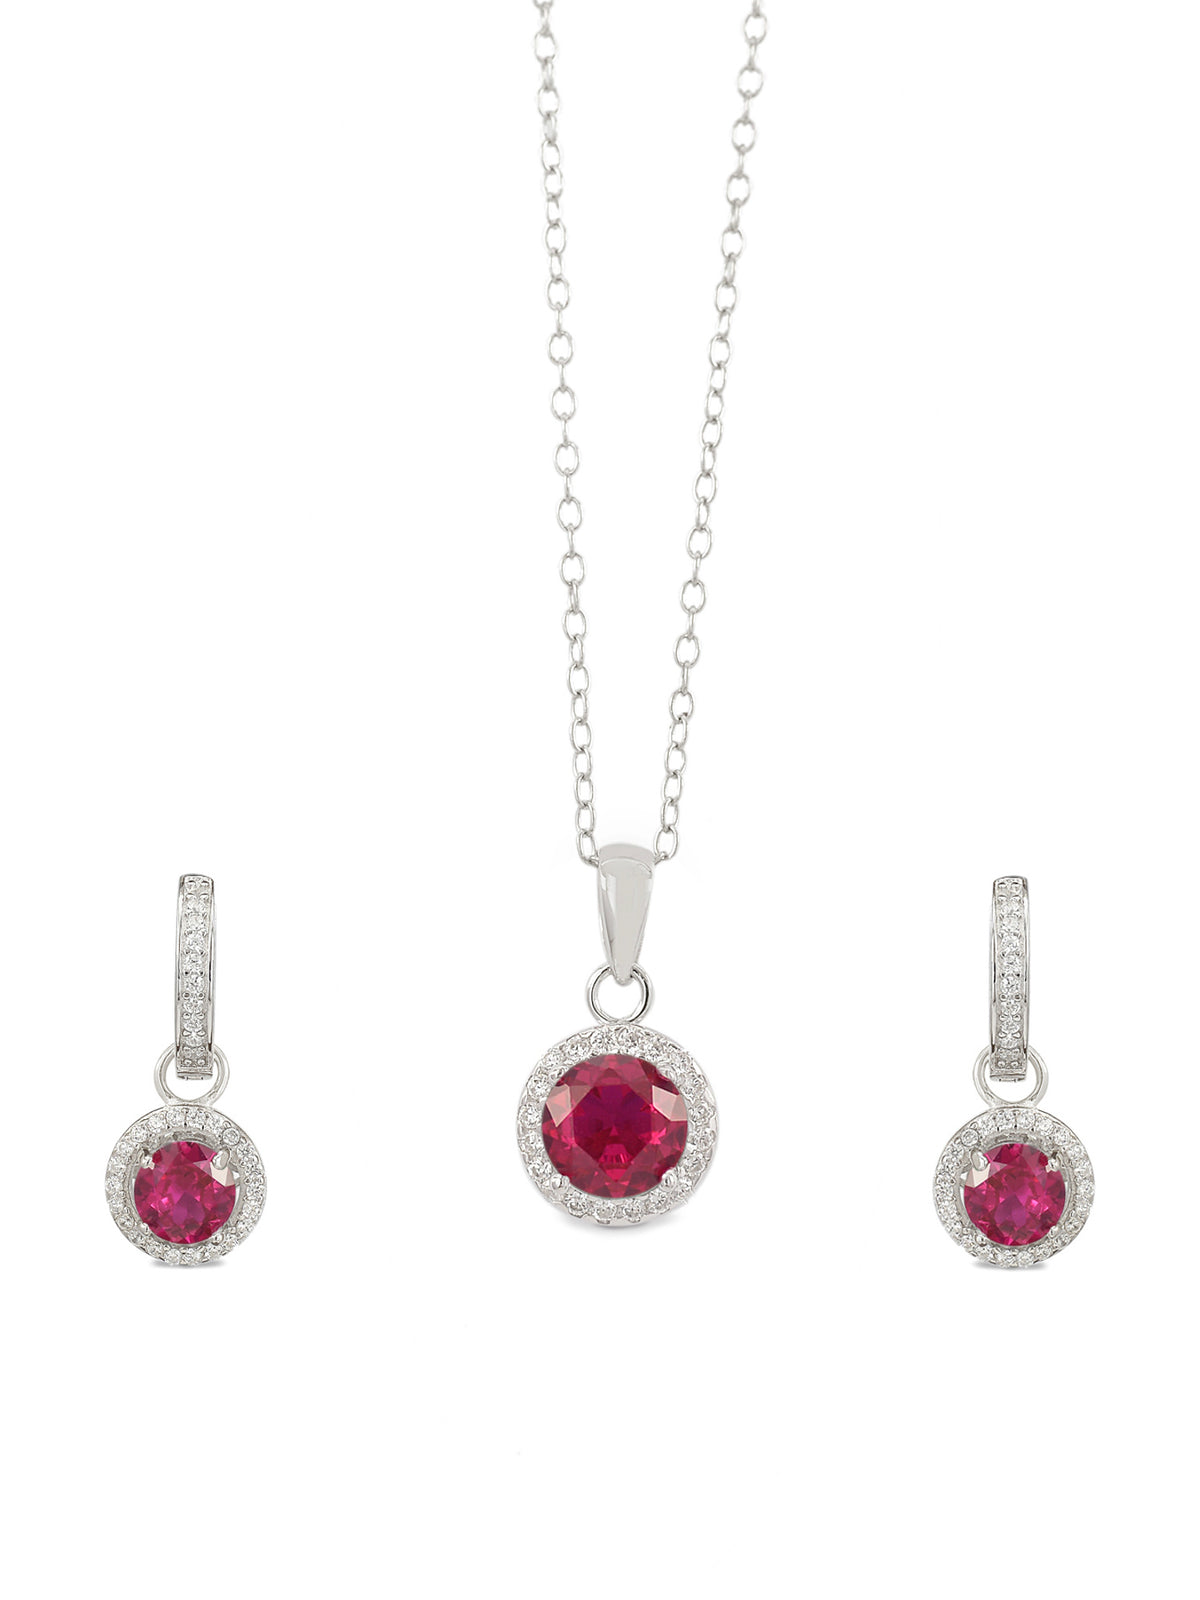 STERLING SILVER RED RUBY HALO NECKLACE WITH EARRINGS